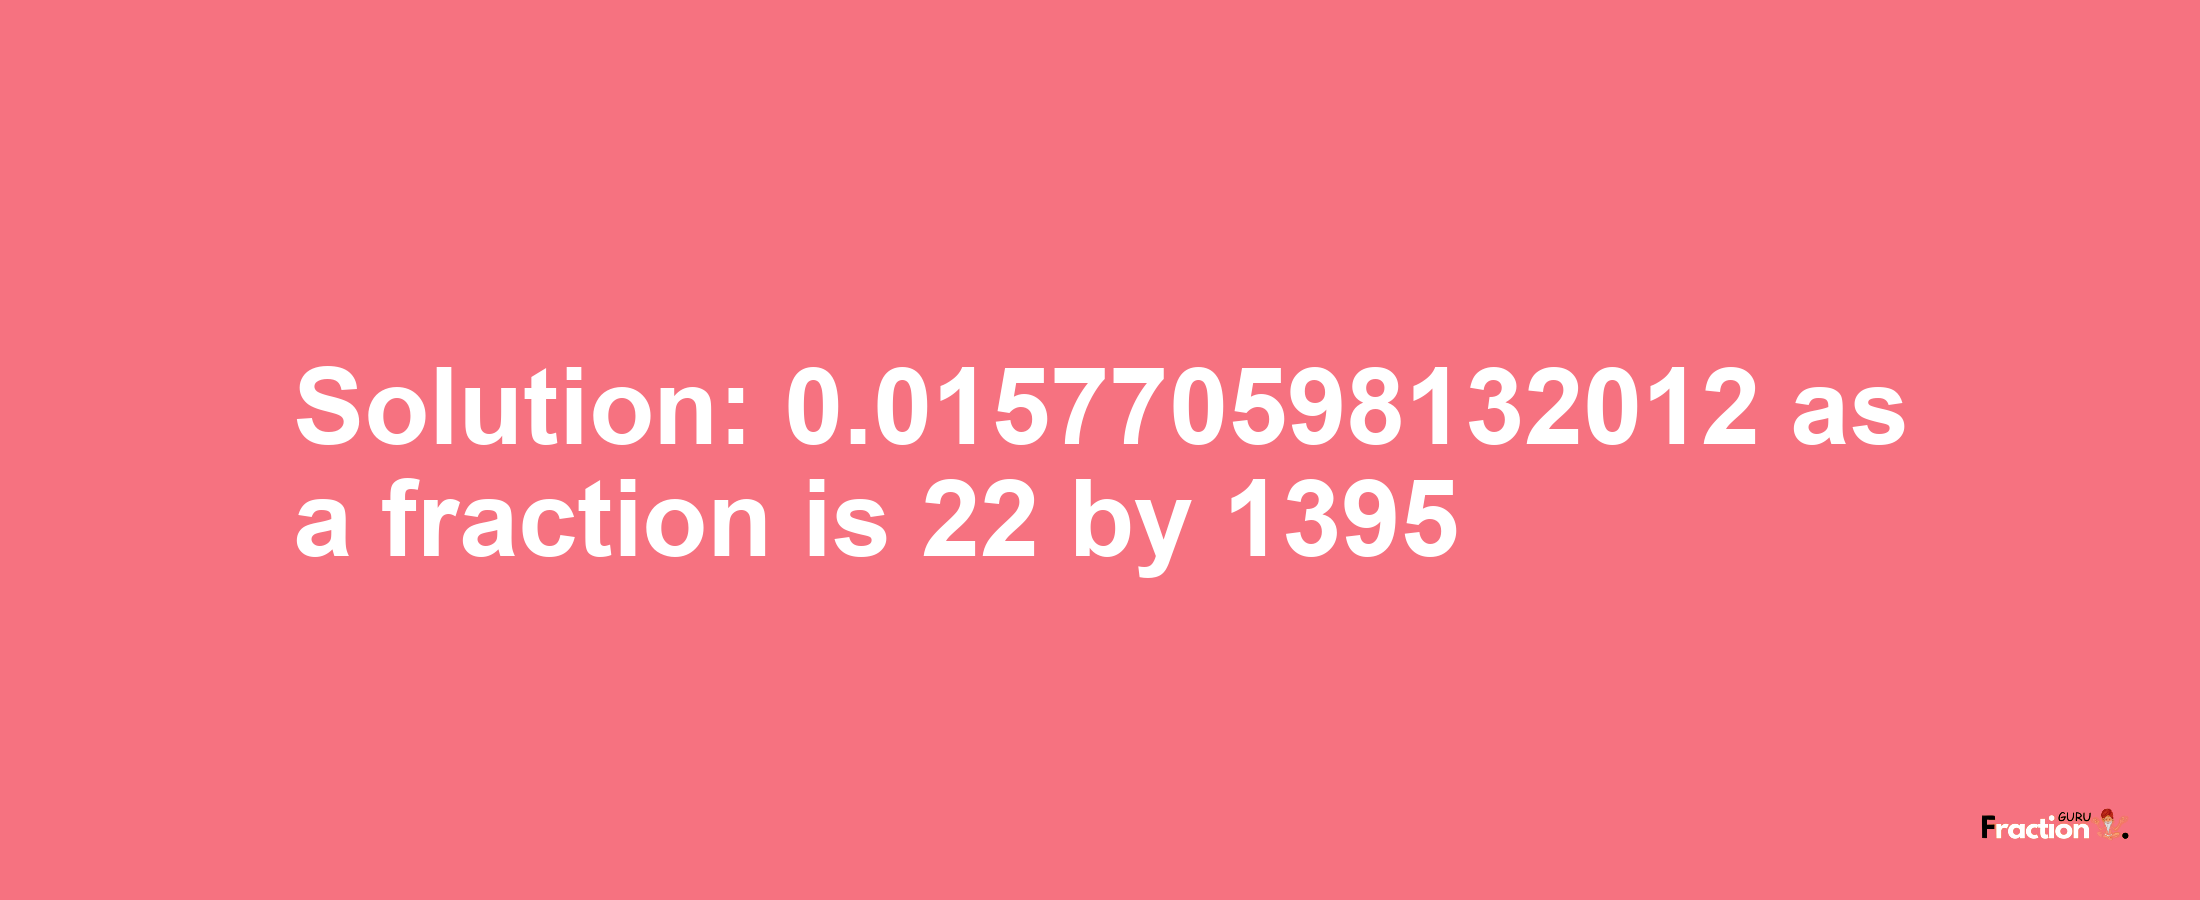 Solution:0.015770598132012 as a fraction is 22/1395